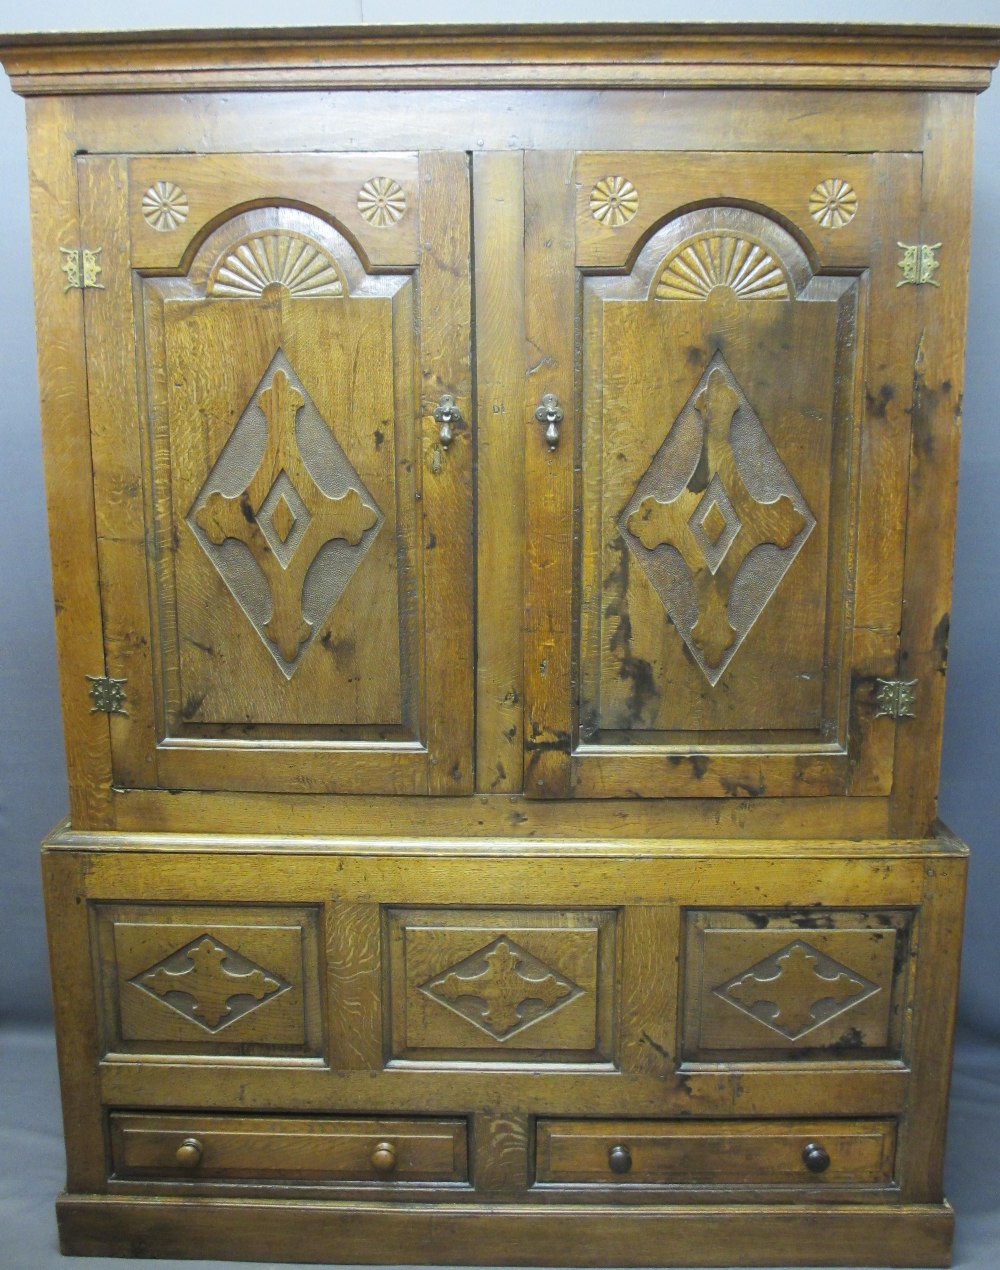 CIRCA 1800 CARVED OAK PRESS CUPBOARD with fan detail and Gothic type crosses on shaped and chamfered